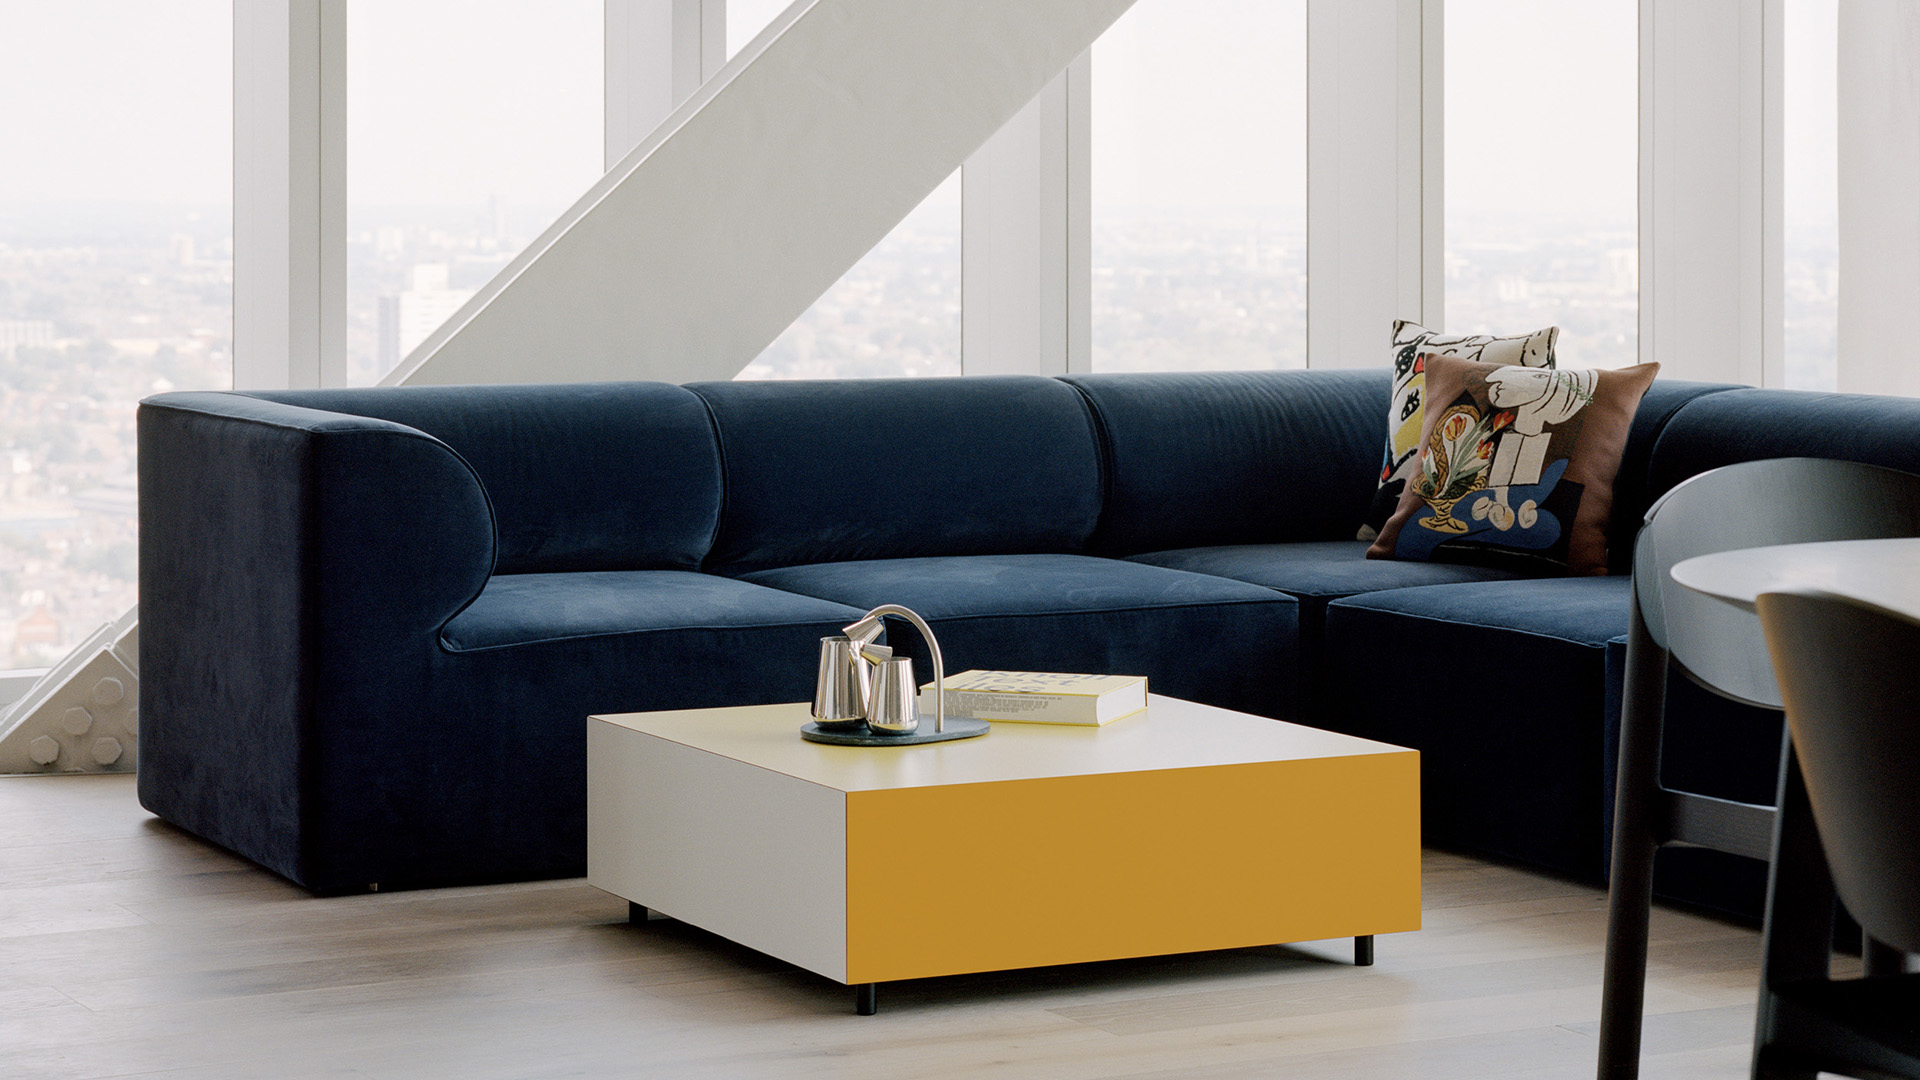 Bloc Side Table, Lifestyle